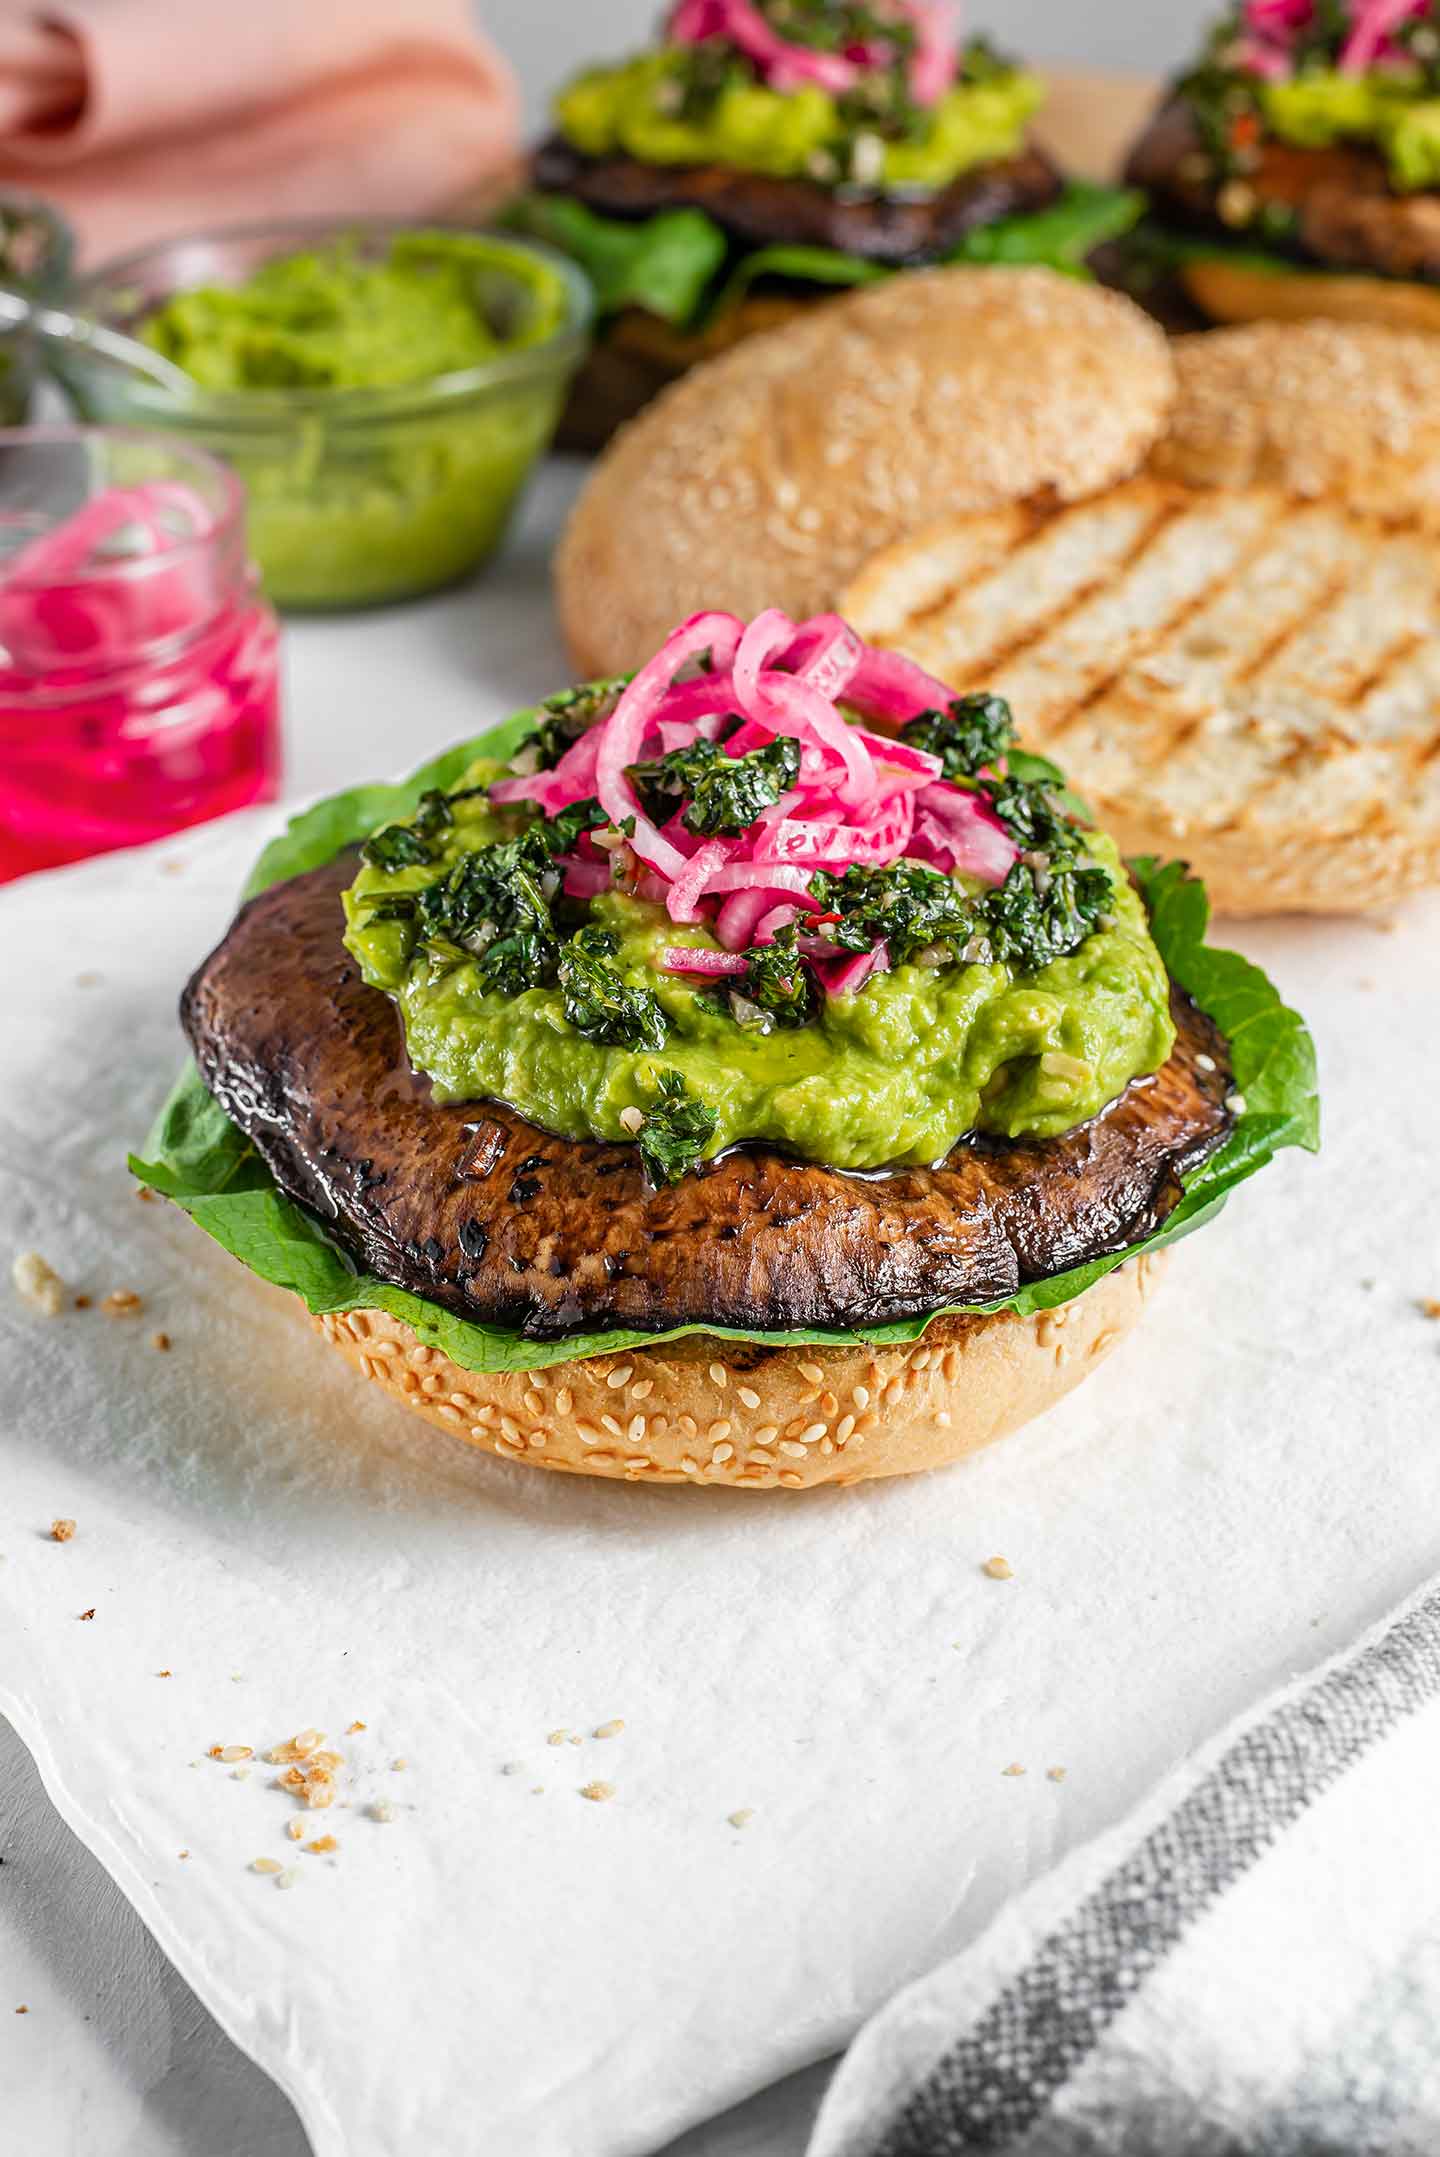 Top down view of a burger without the top bun. Romaine lettuce lays under the mushroom patty with avocado, chimichurri, and pickled red onion on top.